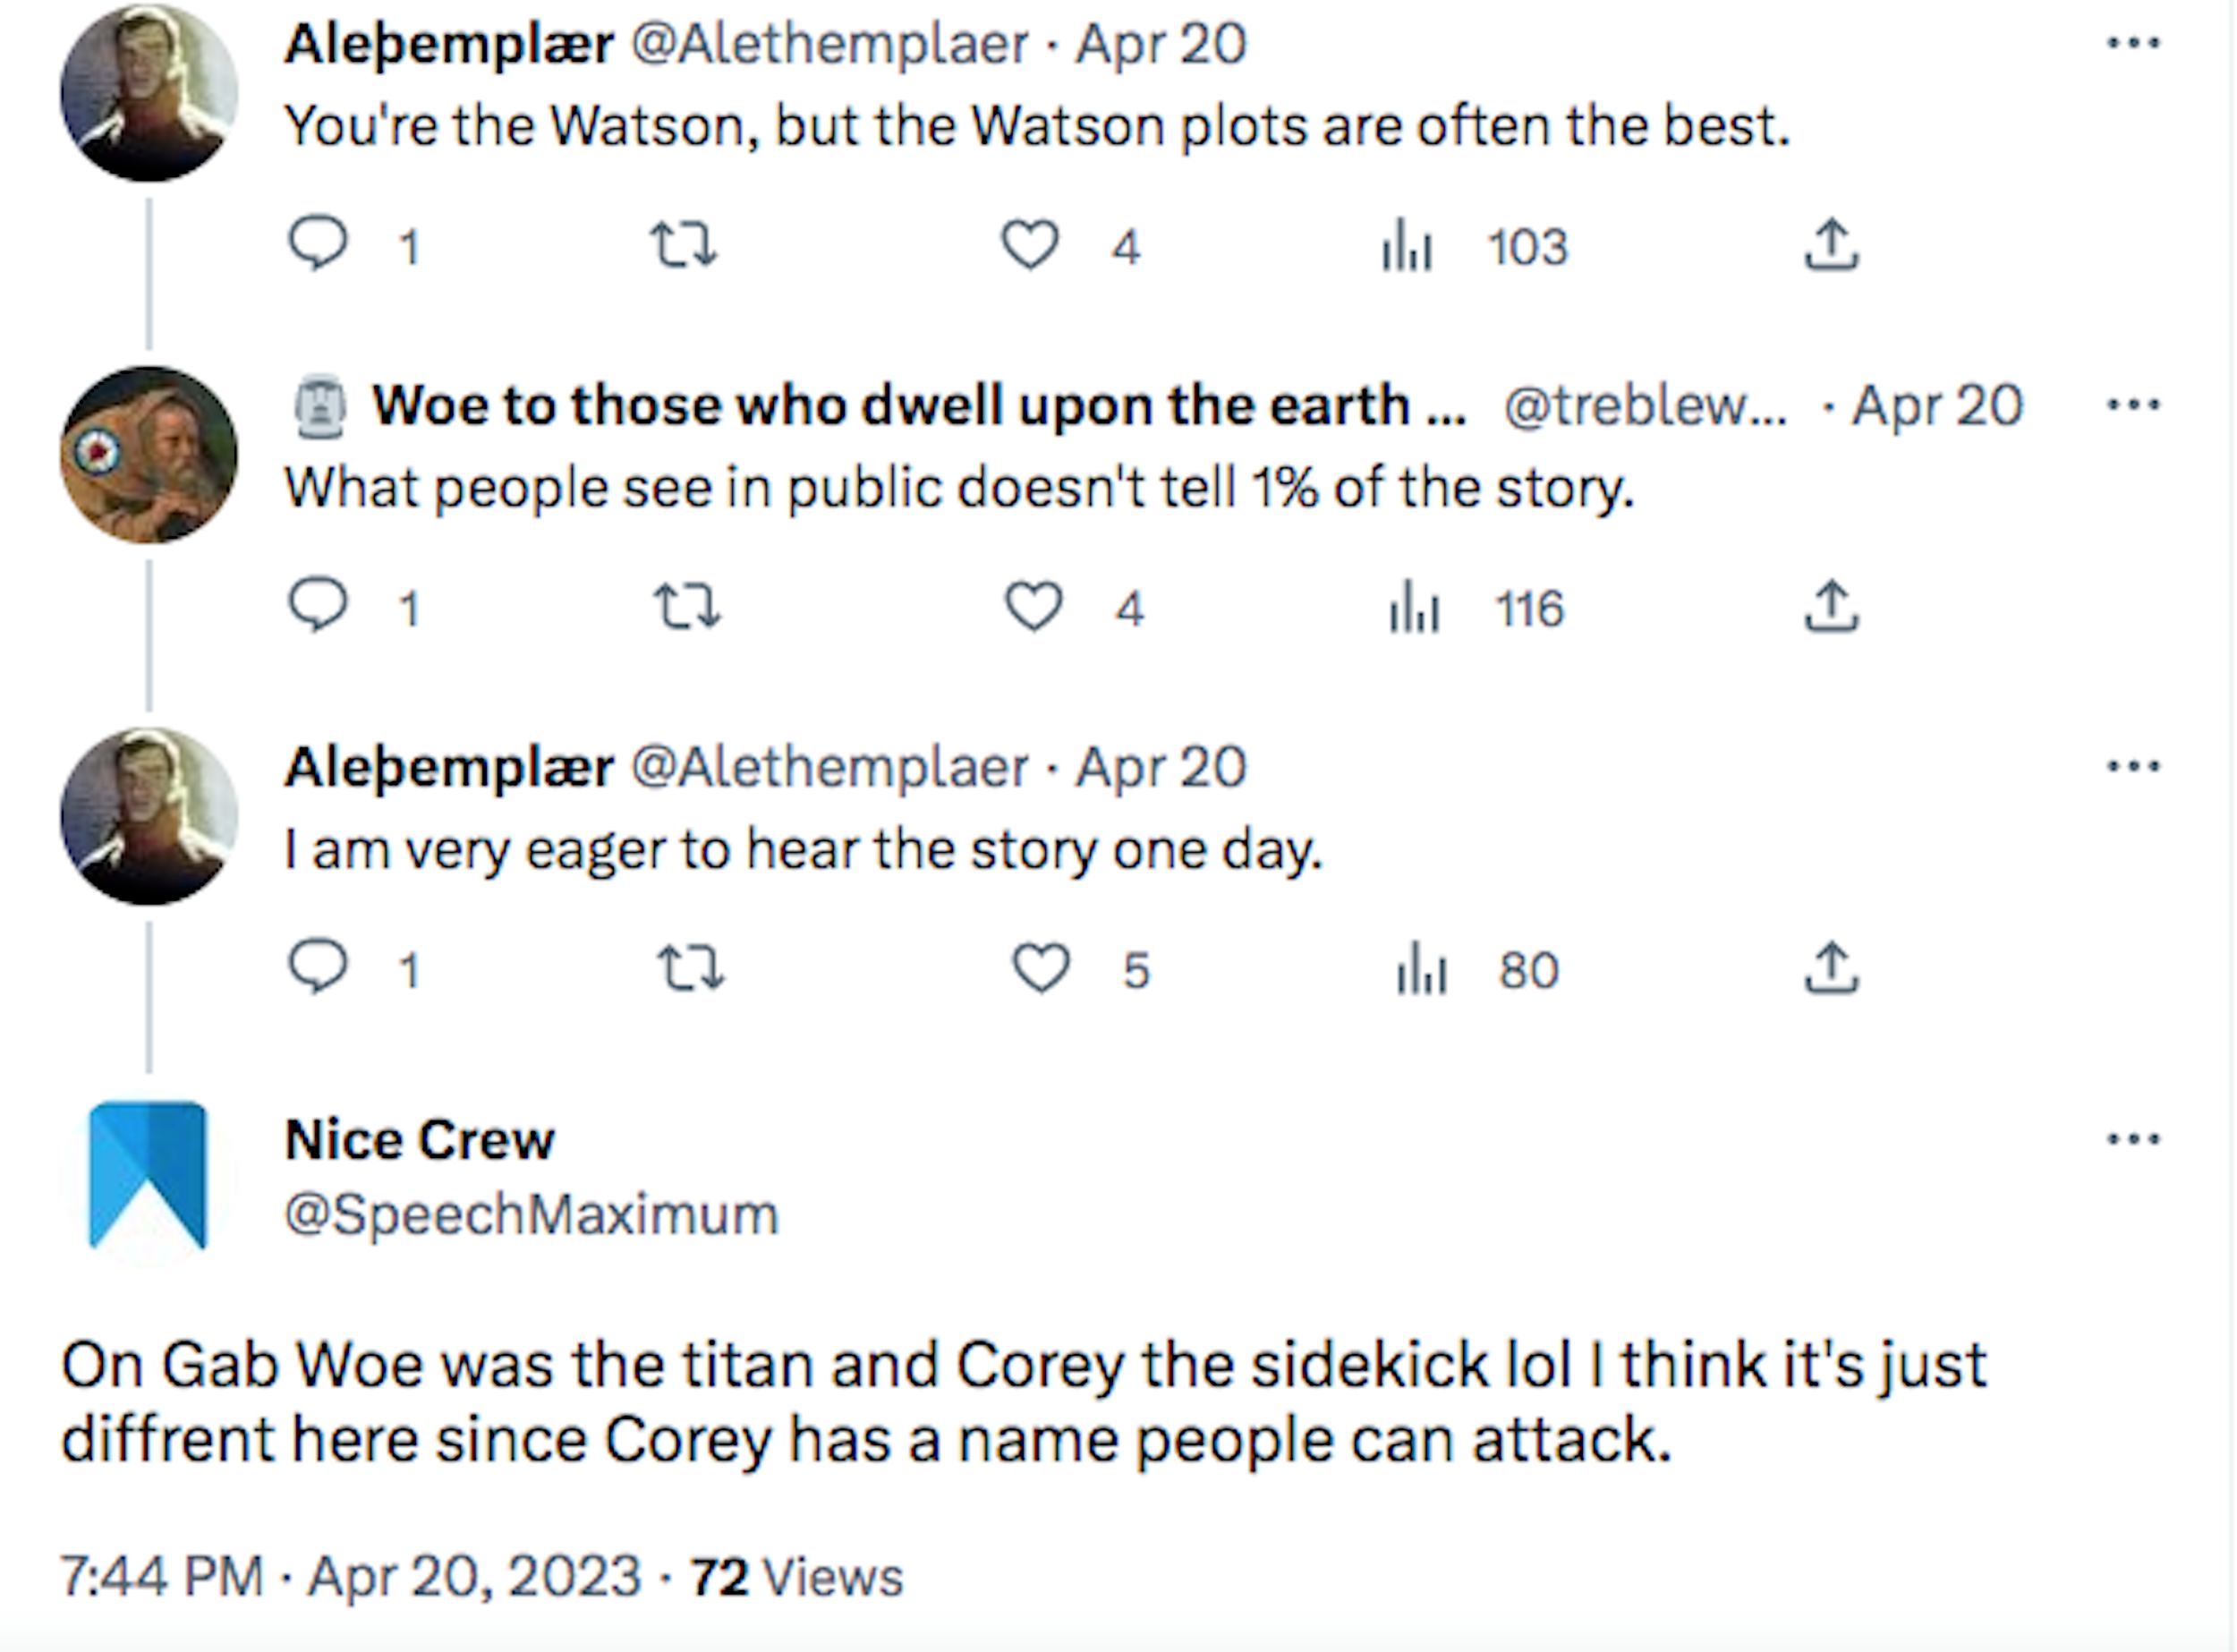 Twitter exchange between users @alethemplaer, @treblewoe, and Nice Crew (@speechmaximum). Alethemplaer: You're the Watson, but Watson plots are often the best. Woe: What people see in public doesn't tell 1% of the story. Alethemplaer: I am very eager to hear the story one day. Nice Crew: On Gab Woe was the titan and Corey the sidekick lol I think it's just diffrent here since Corey has a name people can attack."